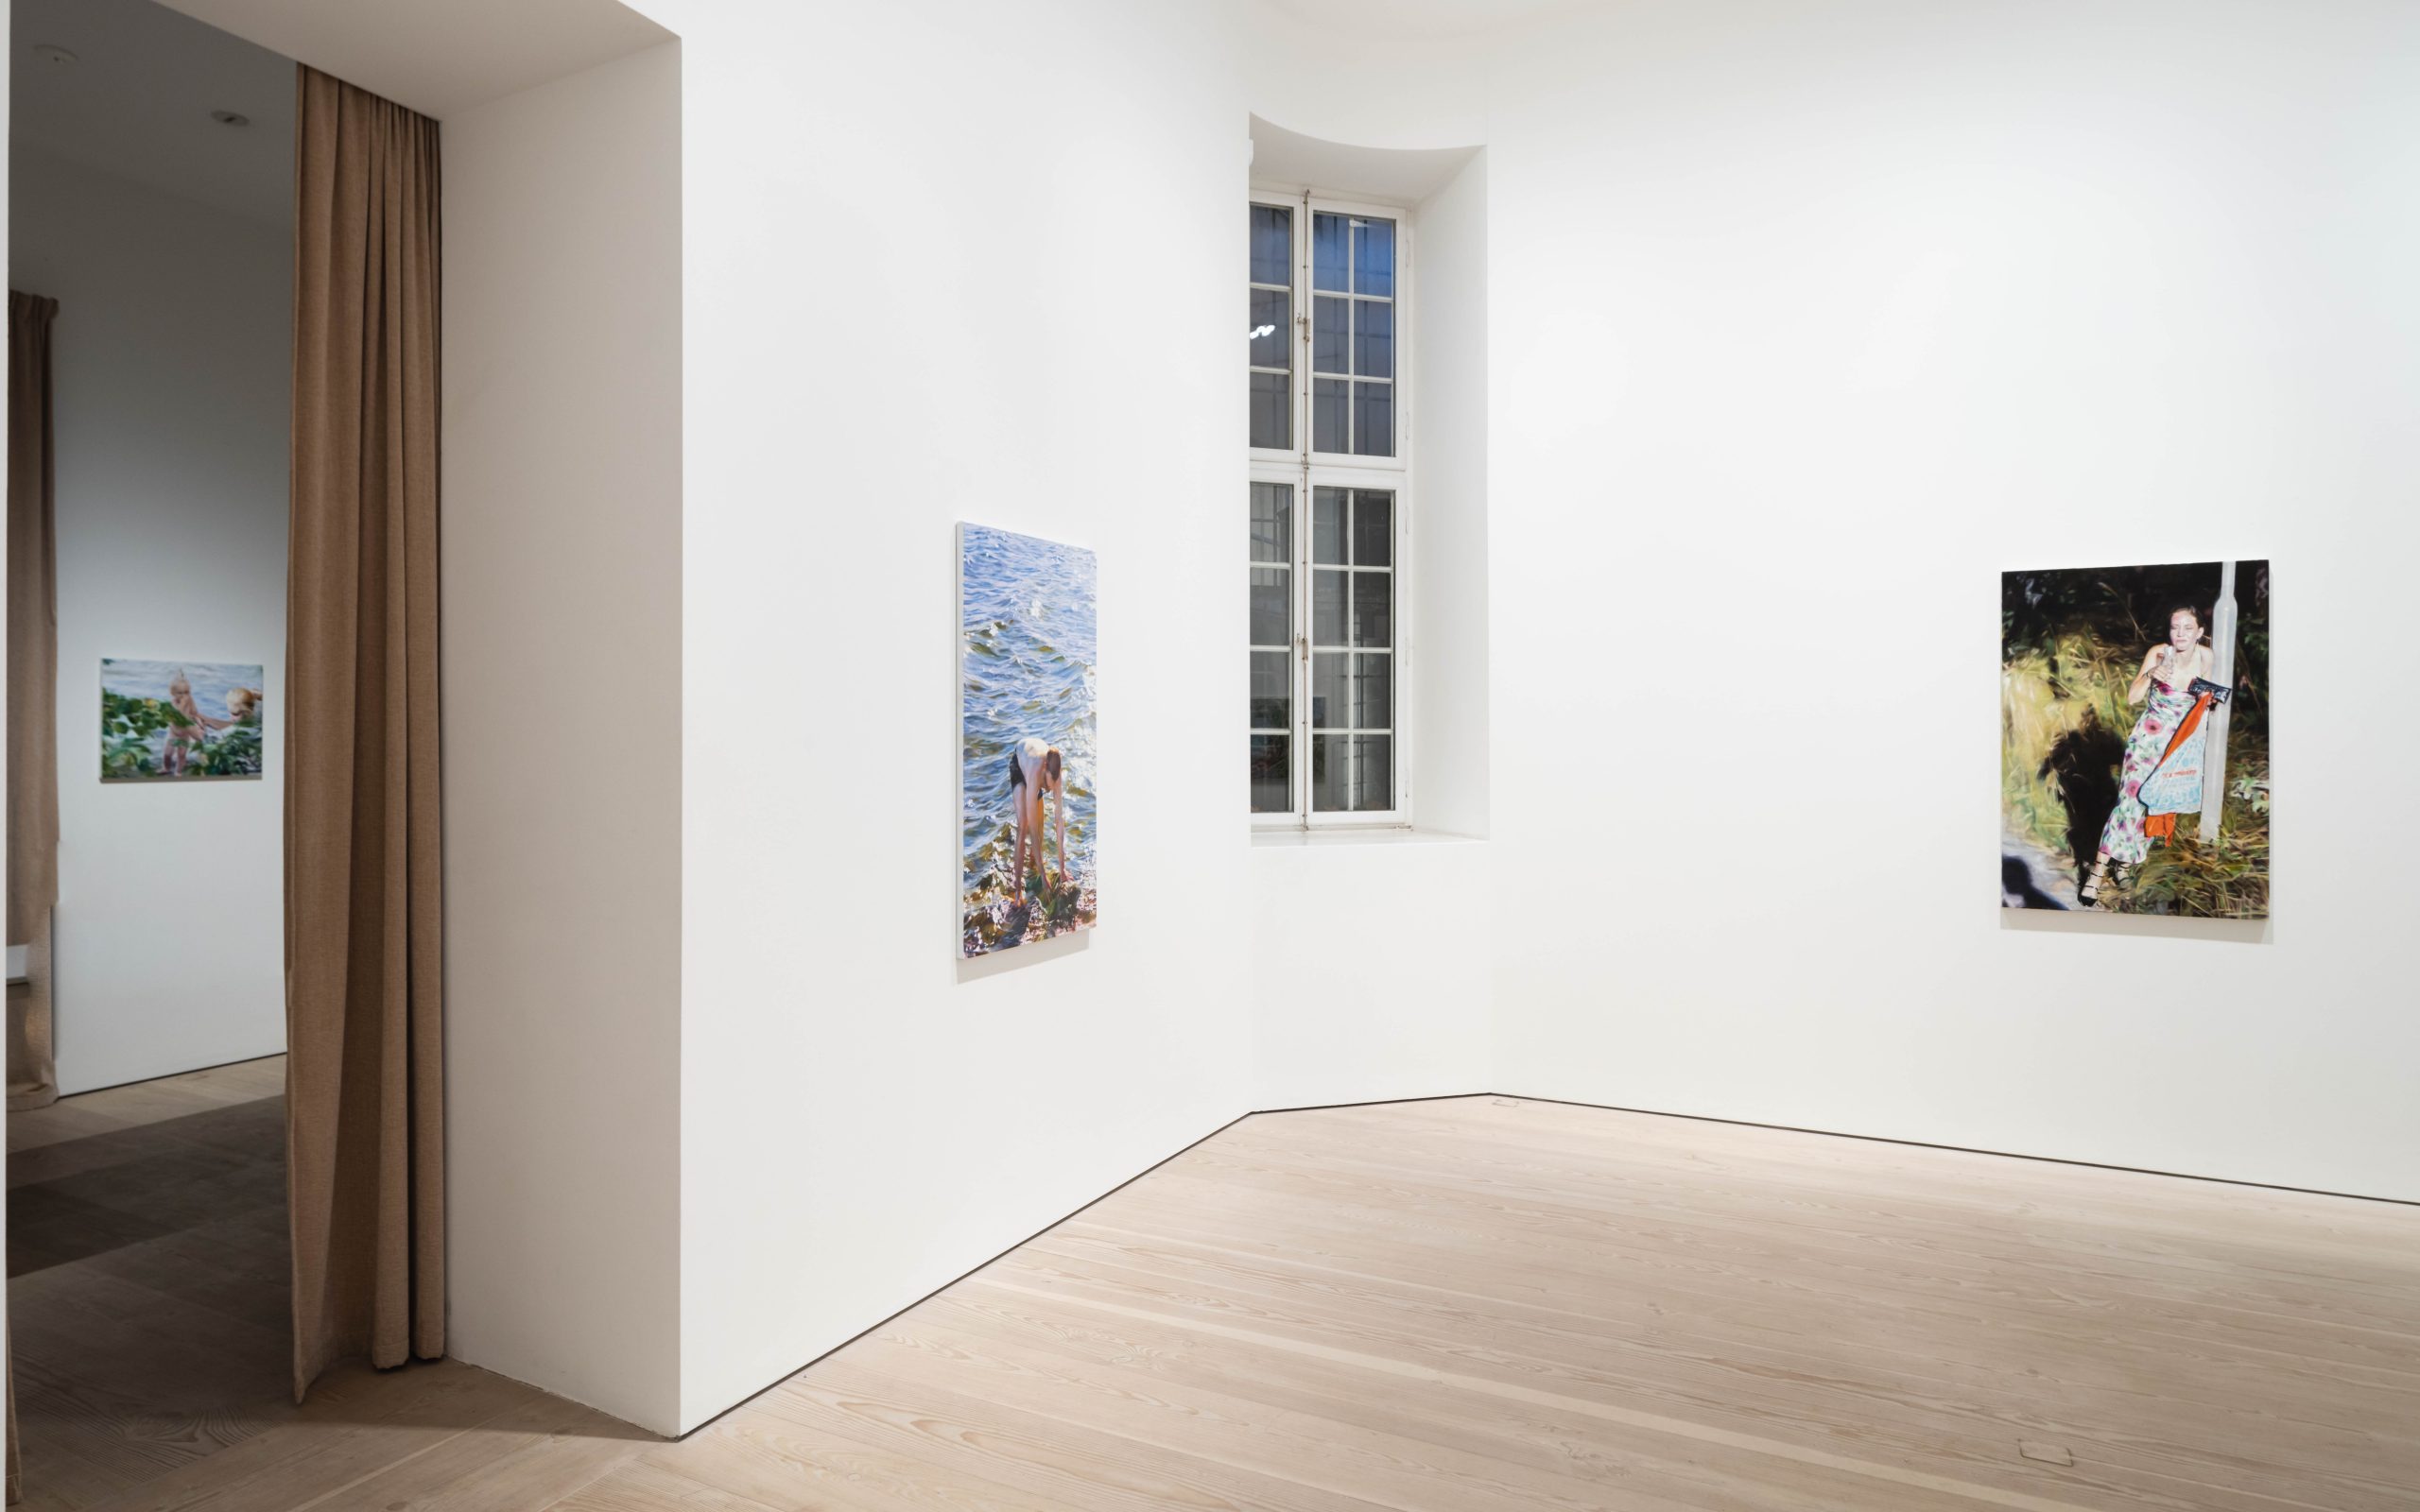 Installation view: "Aspects of a Summer", 2023